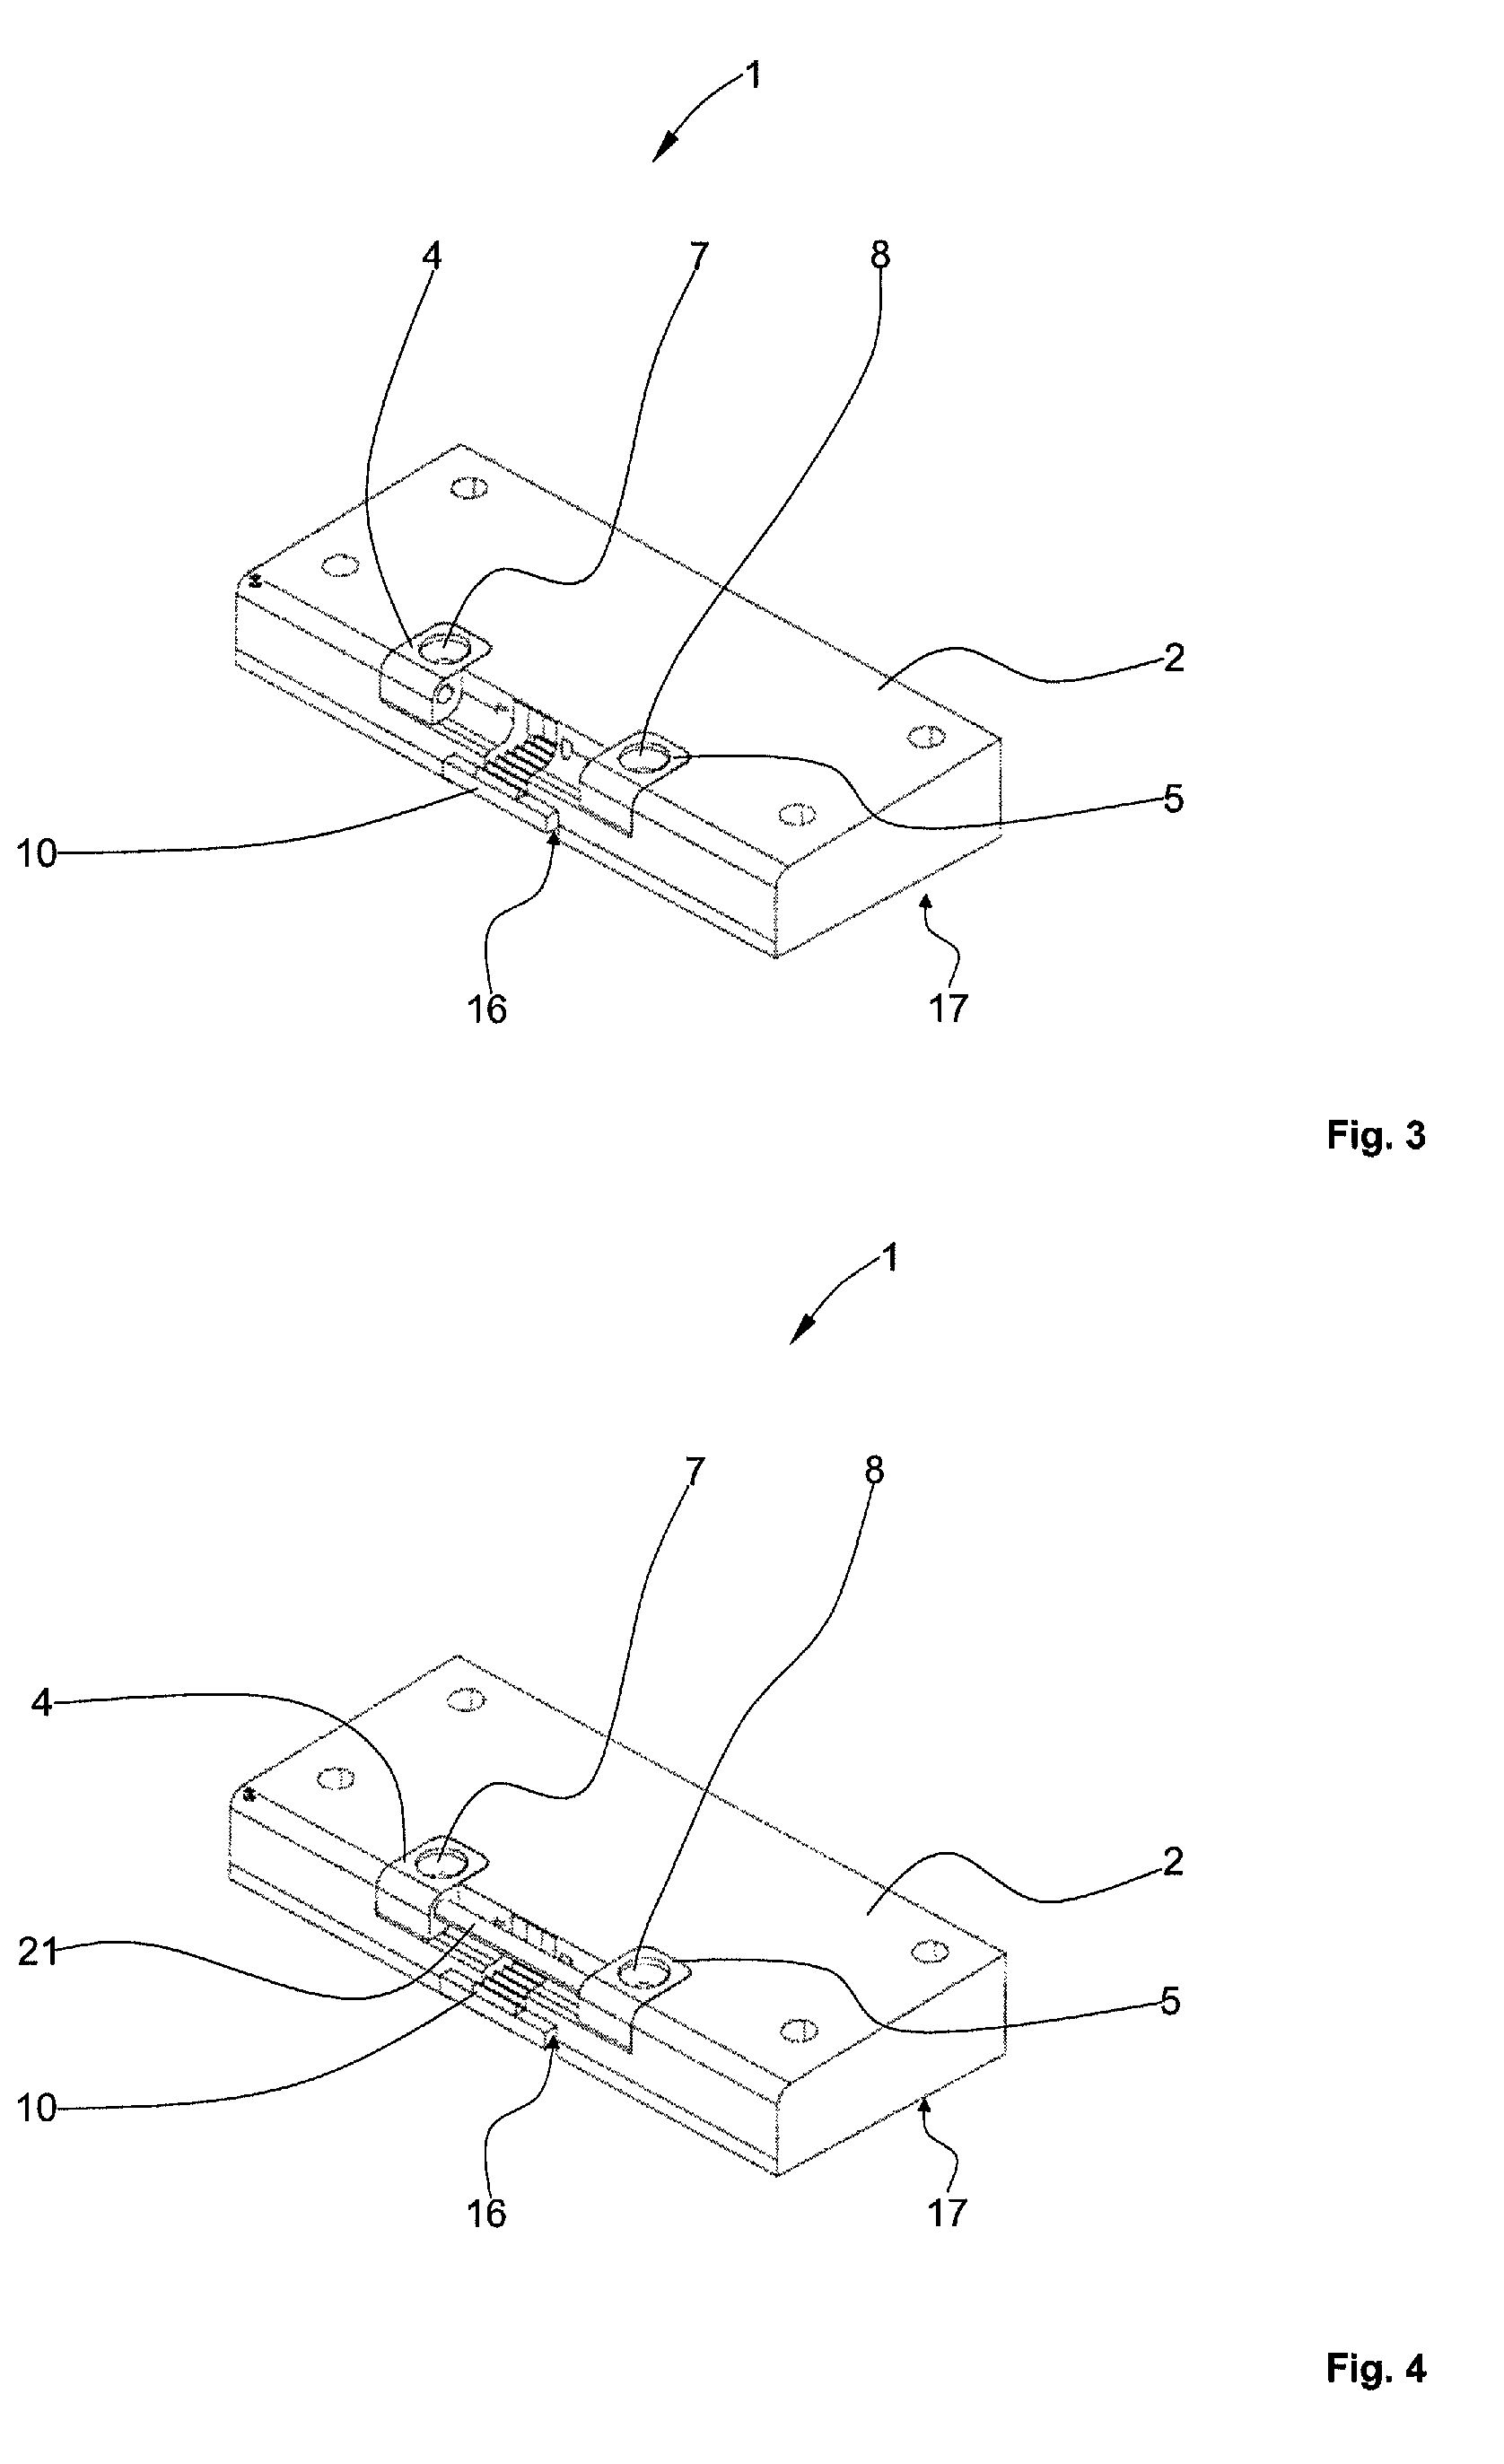 Apparatus for the pivotal fastening of an active surface, in particular a spoiler on a wind tunnel model of an aircraft